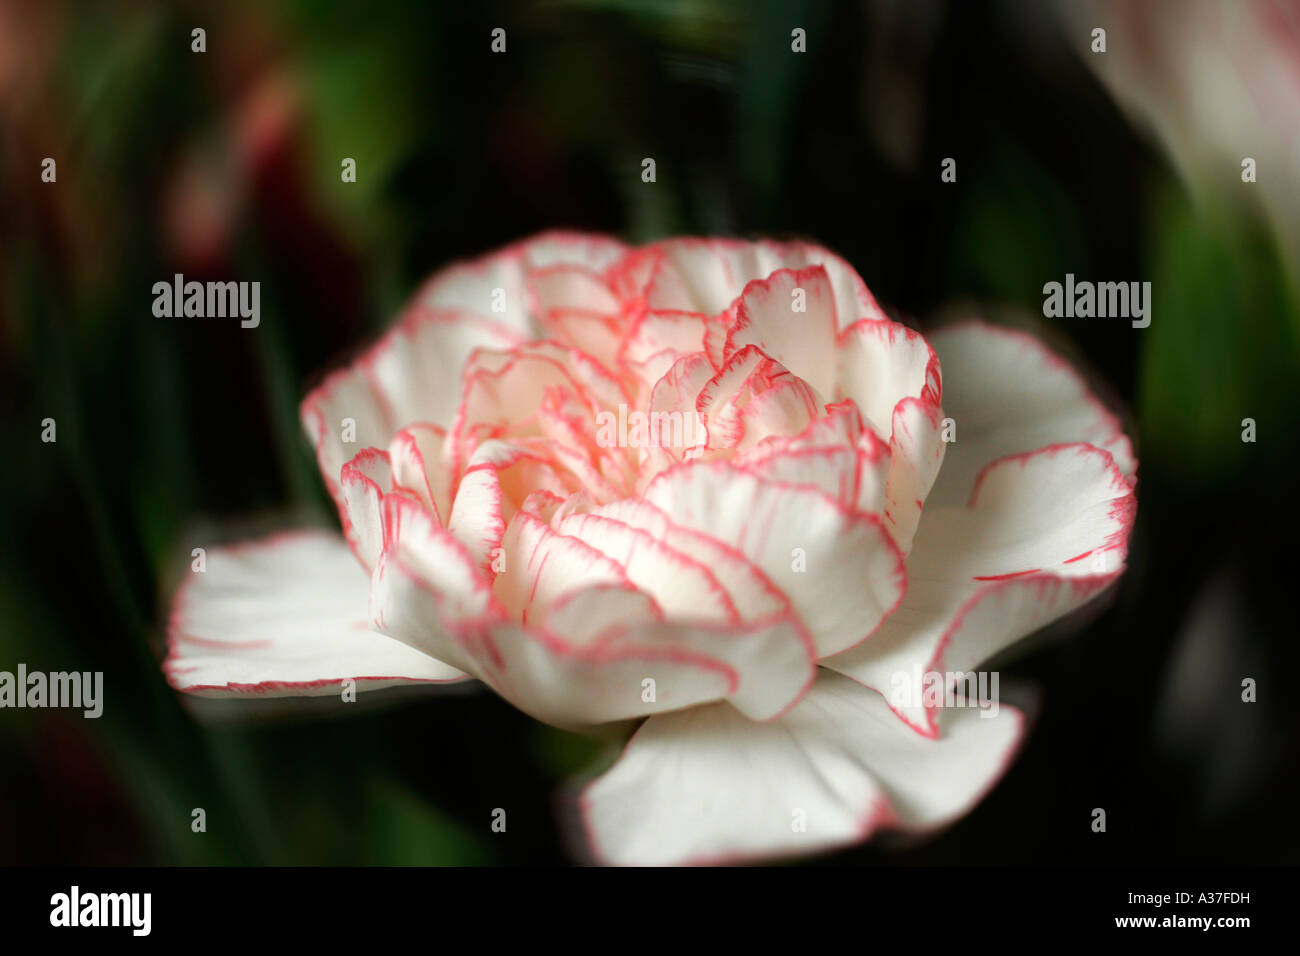 CLOSE UP OF WHITE CARNATION WITH RED TRIM Stock Photo